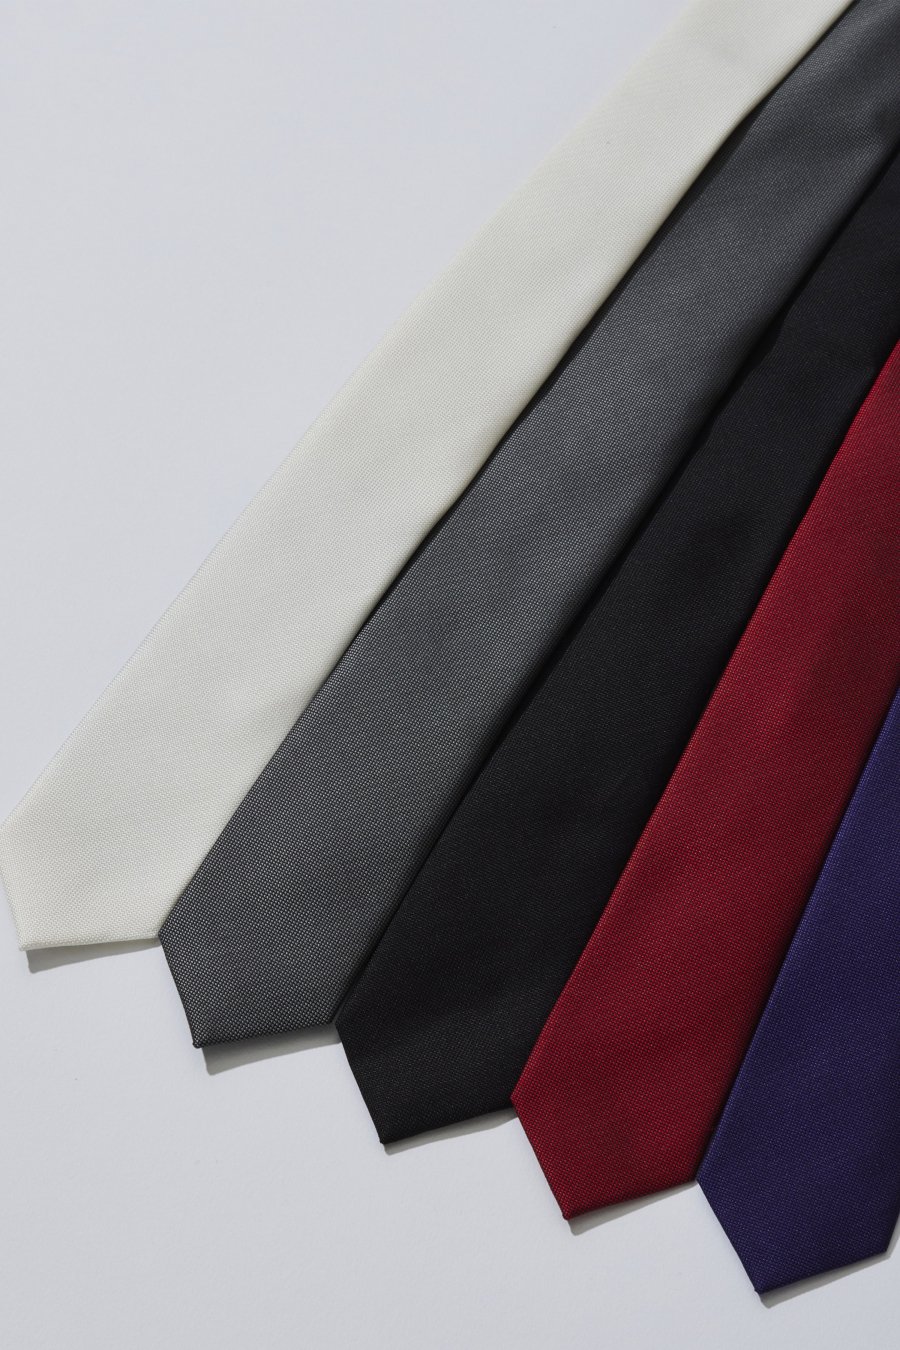 LITTLEBIG  22ss Silk Narrow Tie(White or Black or Purple)<img class='new_mark_img2' src='https://img.shop-pro.jp/img/new/icons15.gif' style='border:none;display:inline;margin:0px;padding:0px;width:auto;' />